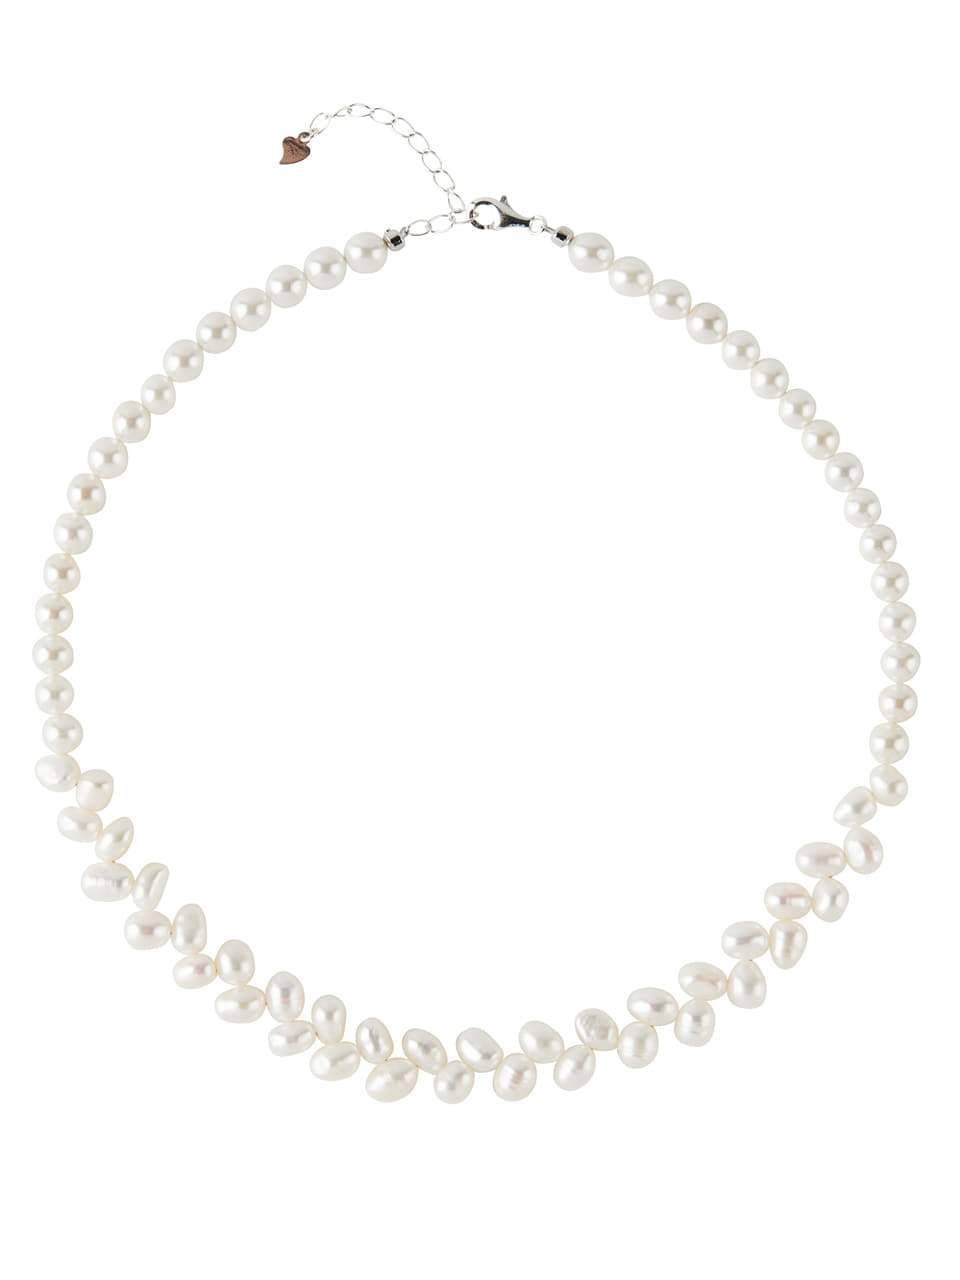 PEARL PEBBLE NECKLACE